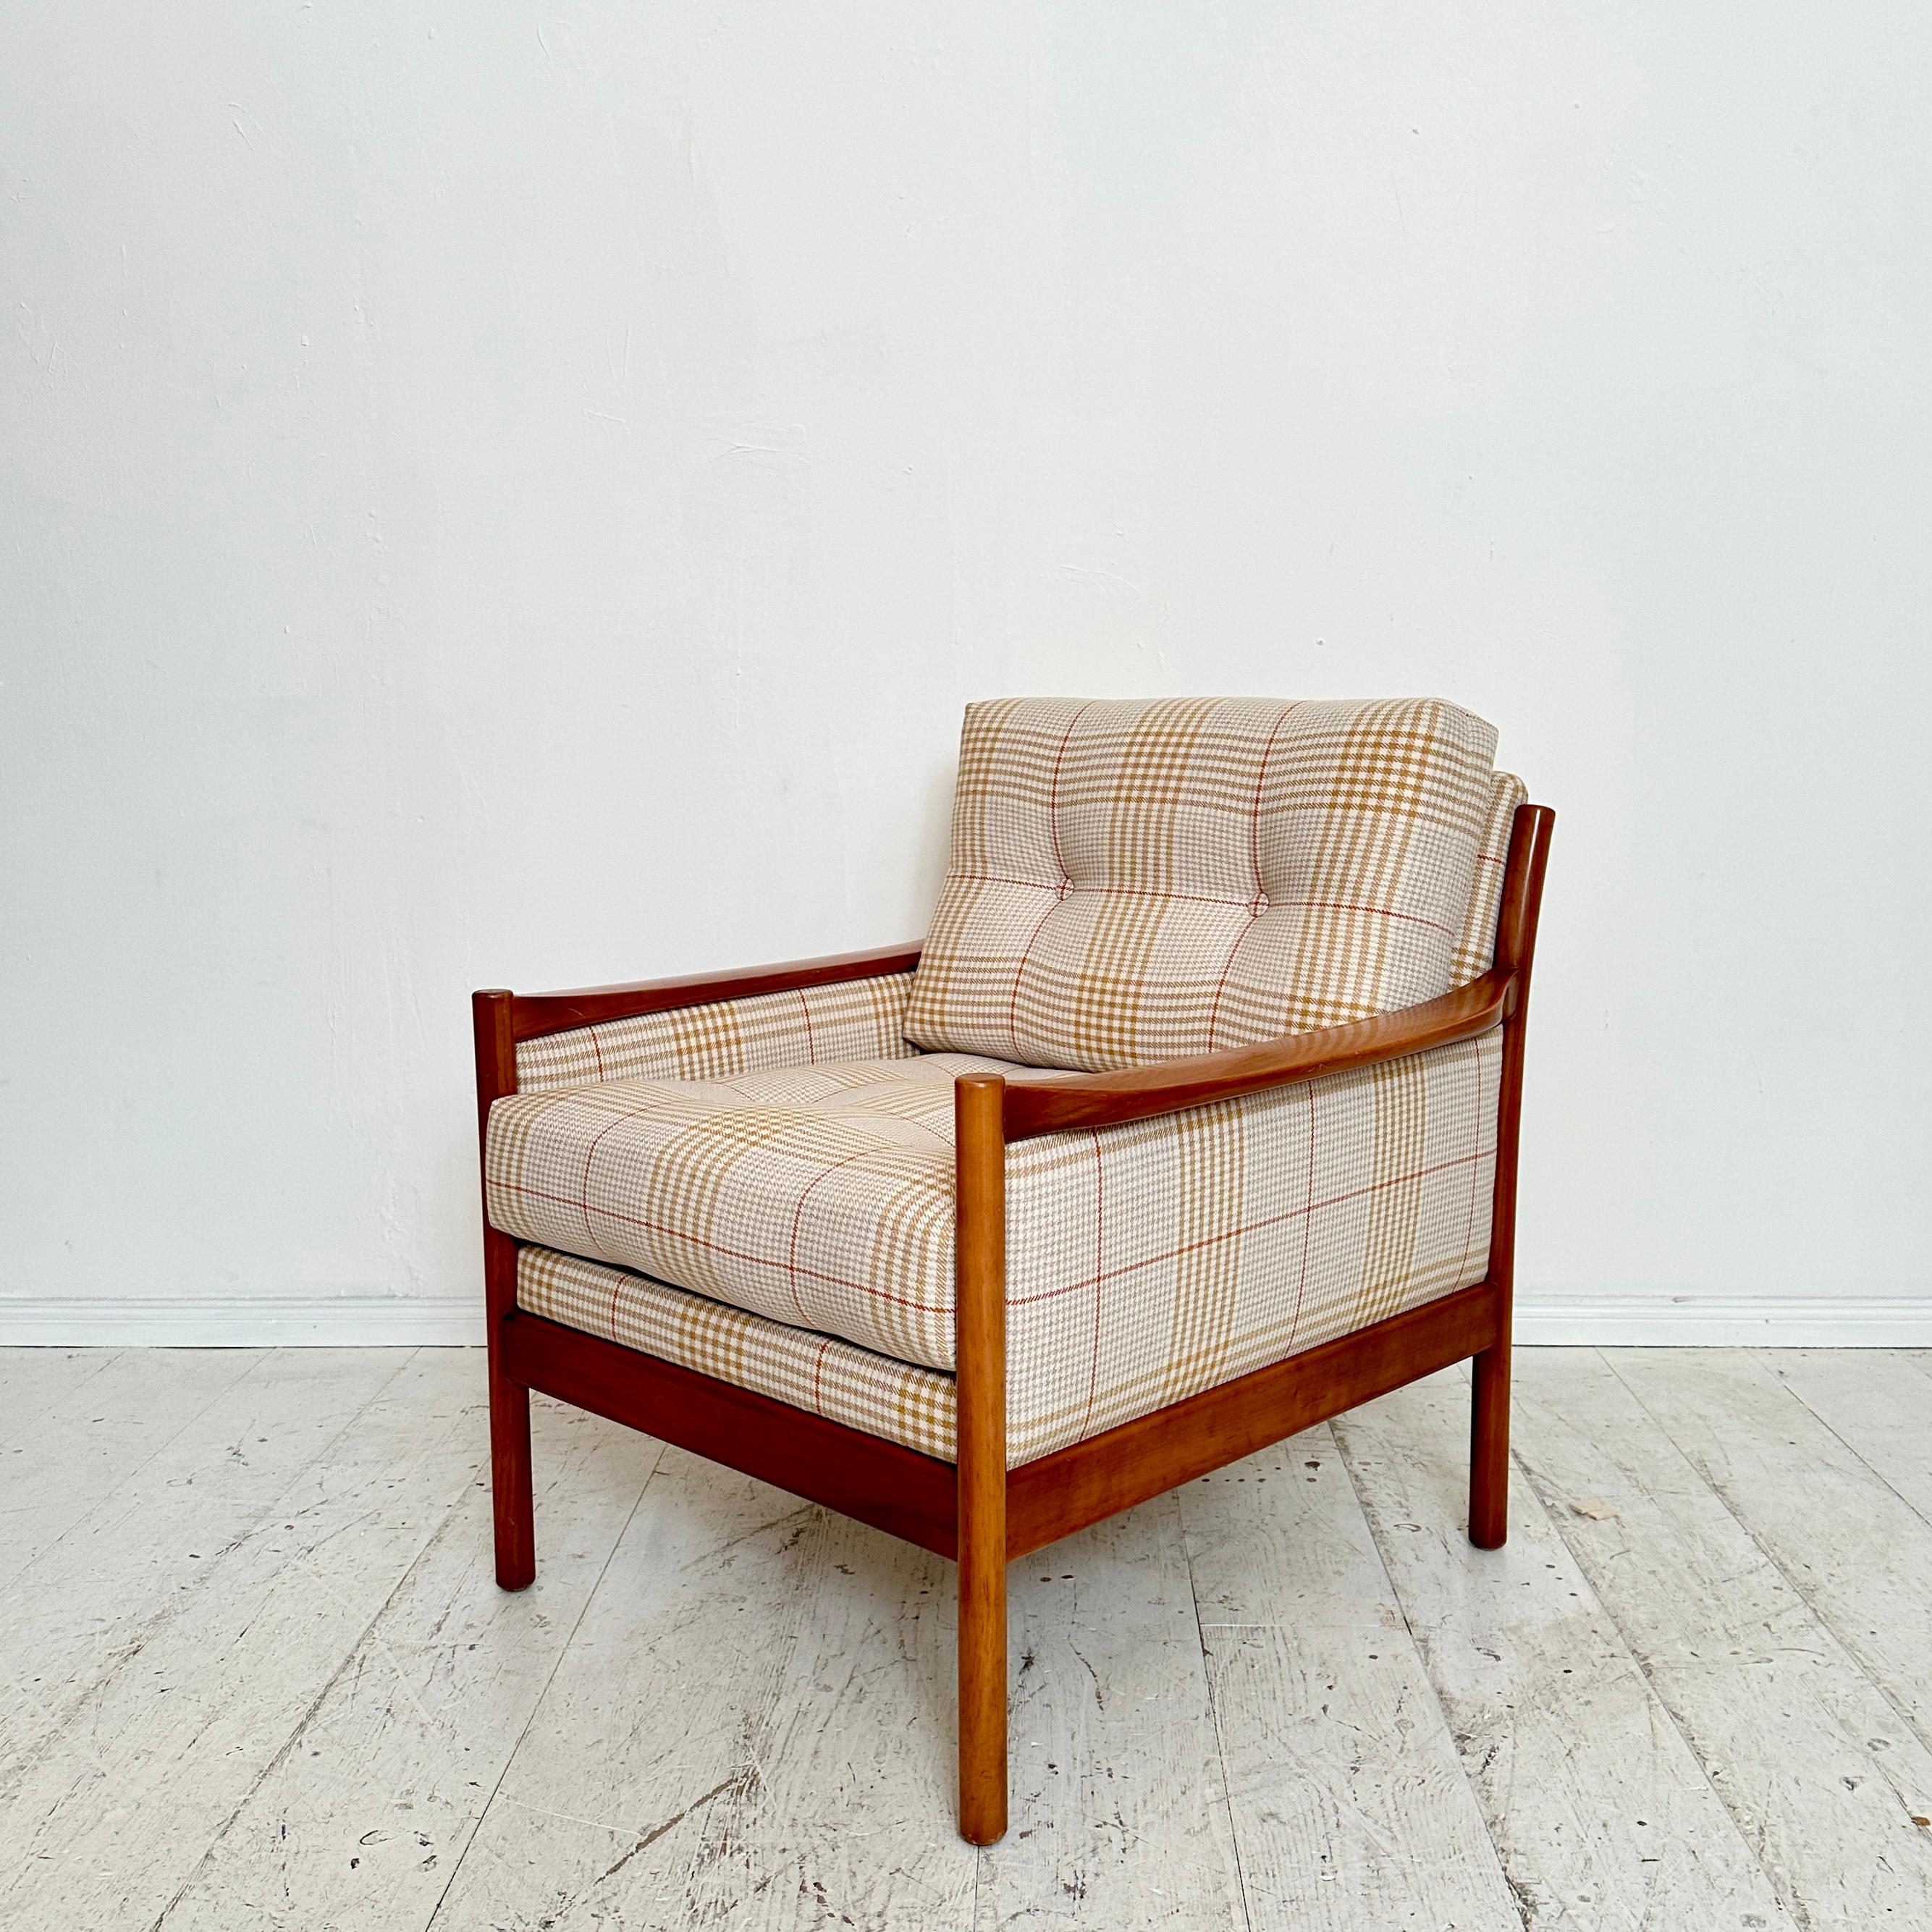 This fantastic Mid Century Scandinavian Armchair was made around 1960.
It is made out of solid Cherry Wood and newly upholstered in a yellow brown Checked Fabric.
Beautiful detailed work.
A unique piece which is a great eye-catcher for your antique,